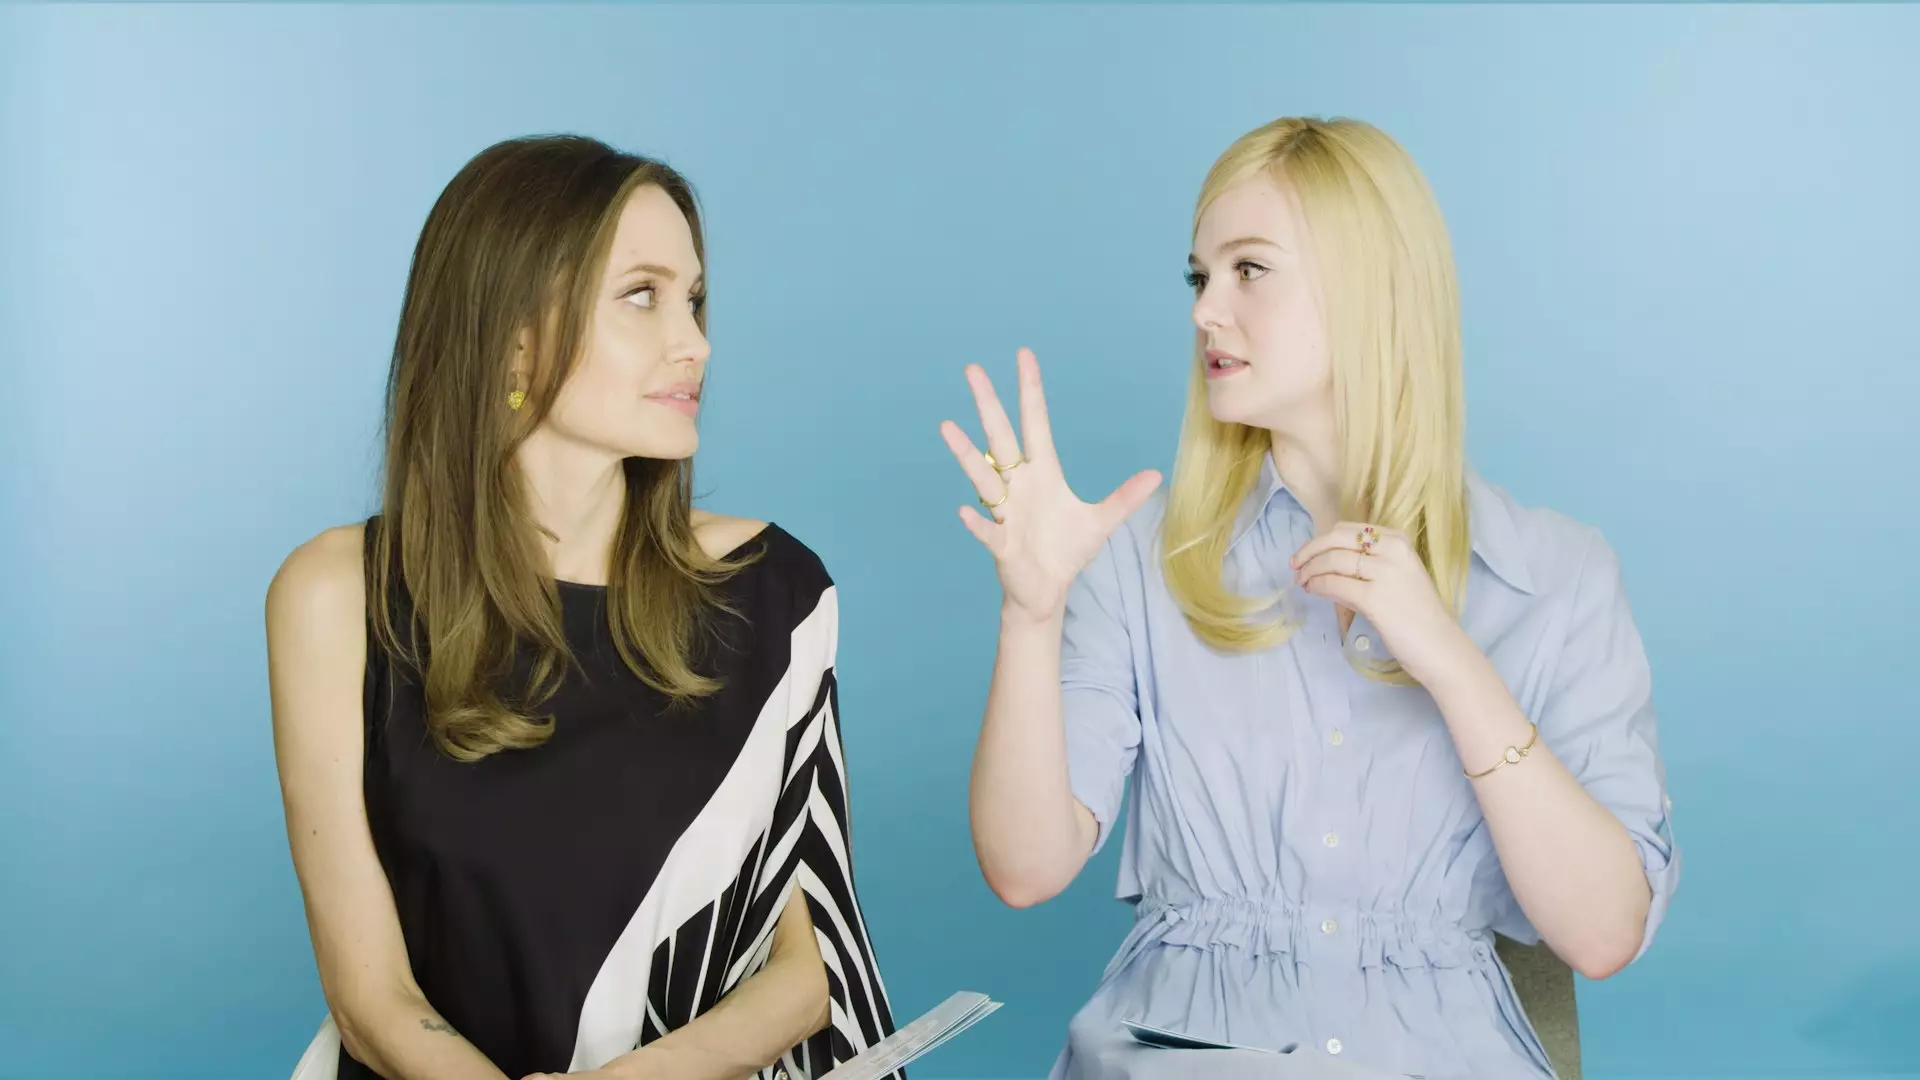 Angelina and Elle opened up on social anxiety and learning from your failures (